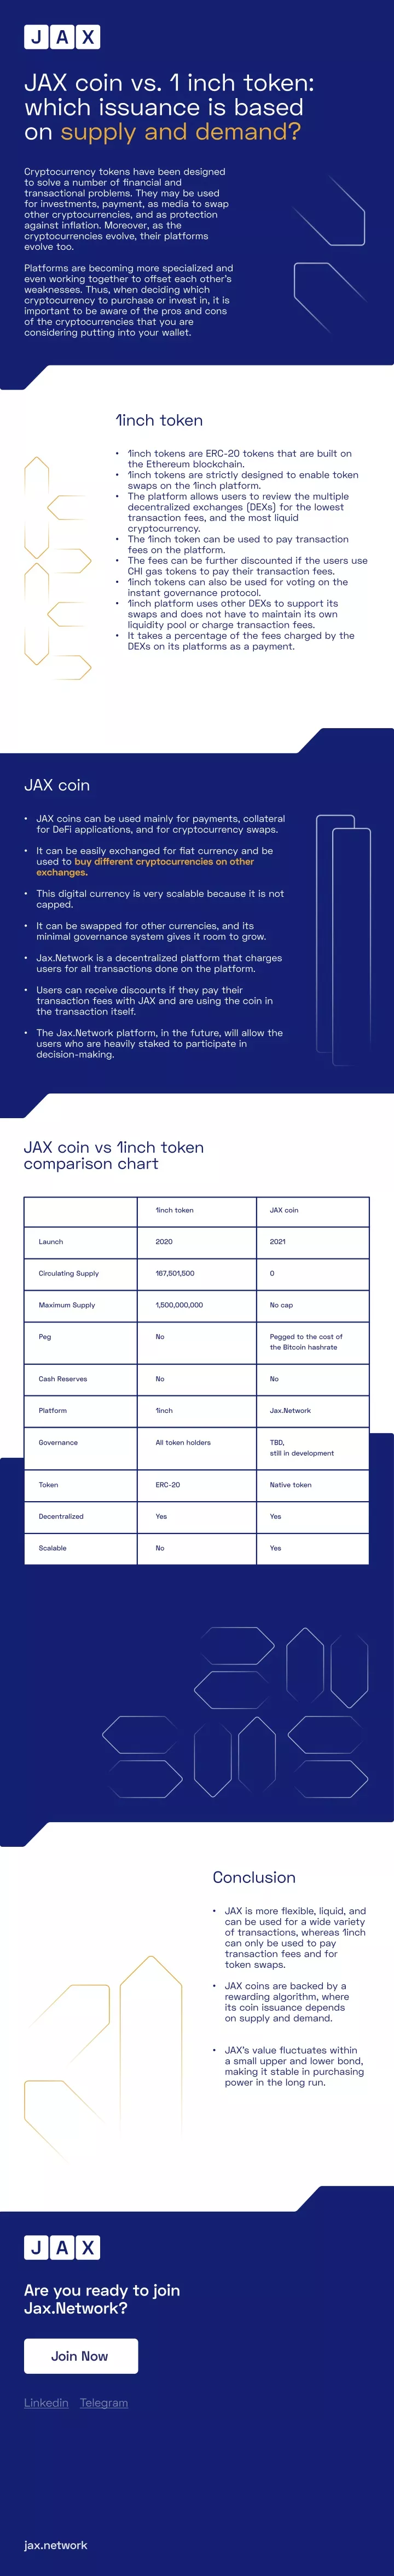 jax coin vs 1 inch token which issuance is based